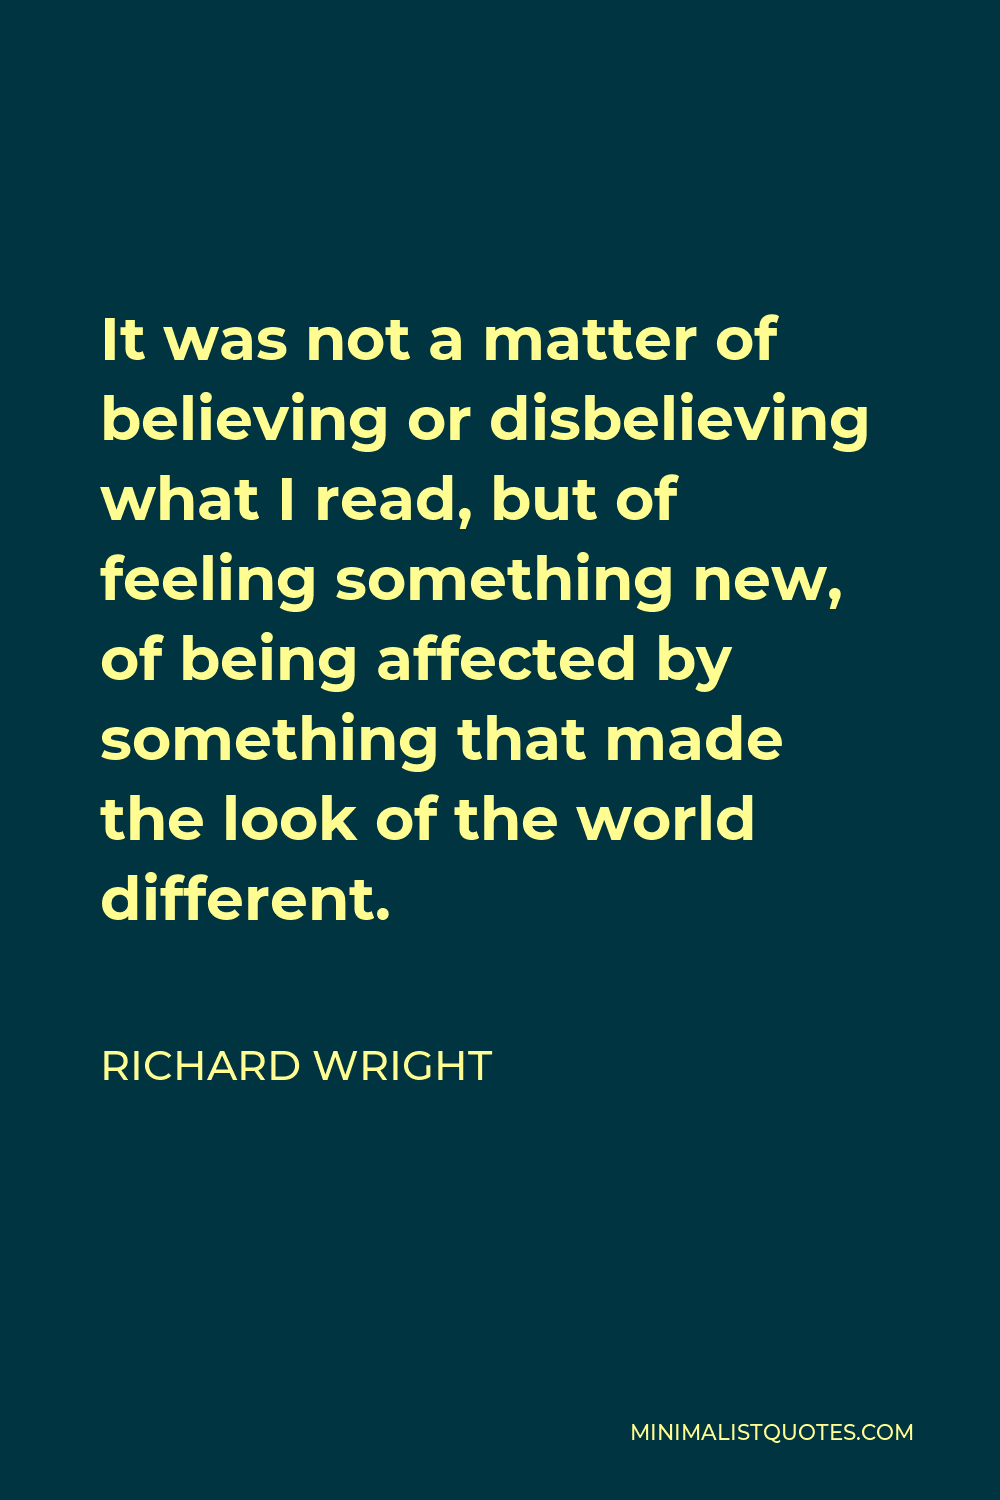 Richard Wright Quote - It was not a matter of believing or disbelieving what I read, but of feeling something new, of being affected by something that made the look of the world different.